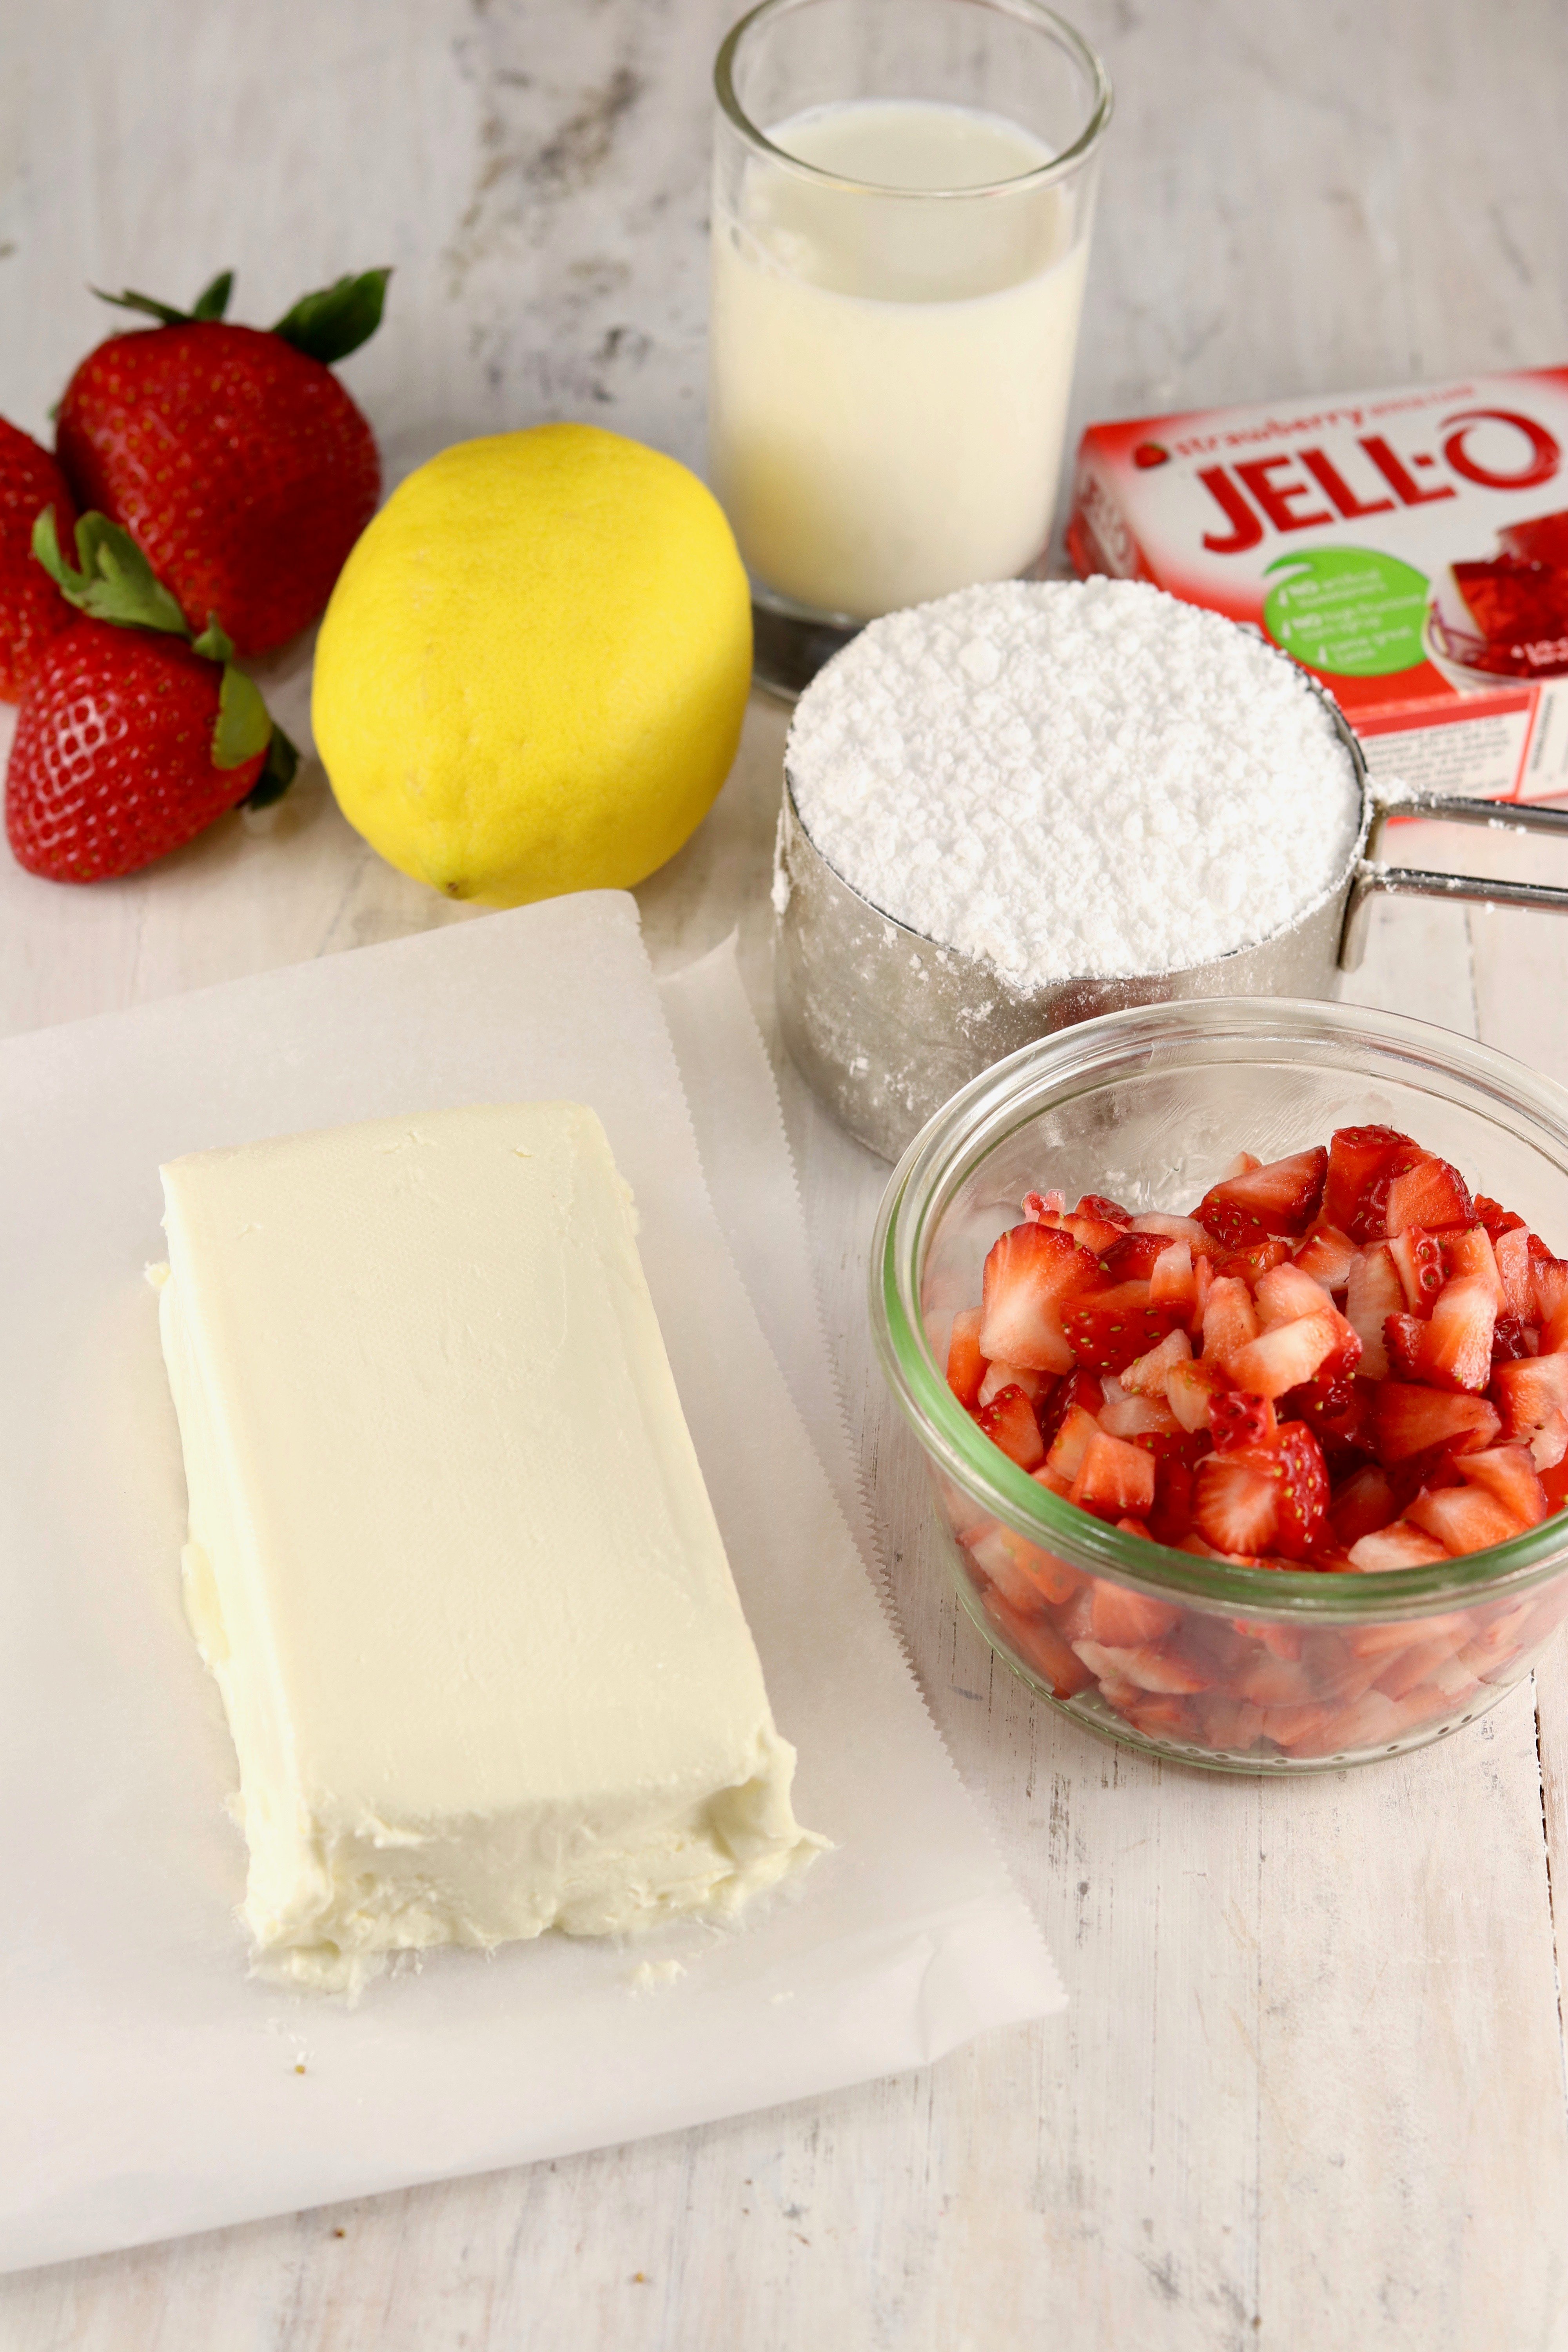 Ingredients for Strawberry Cream Cheese Frosting